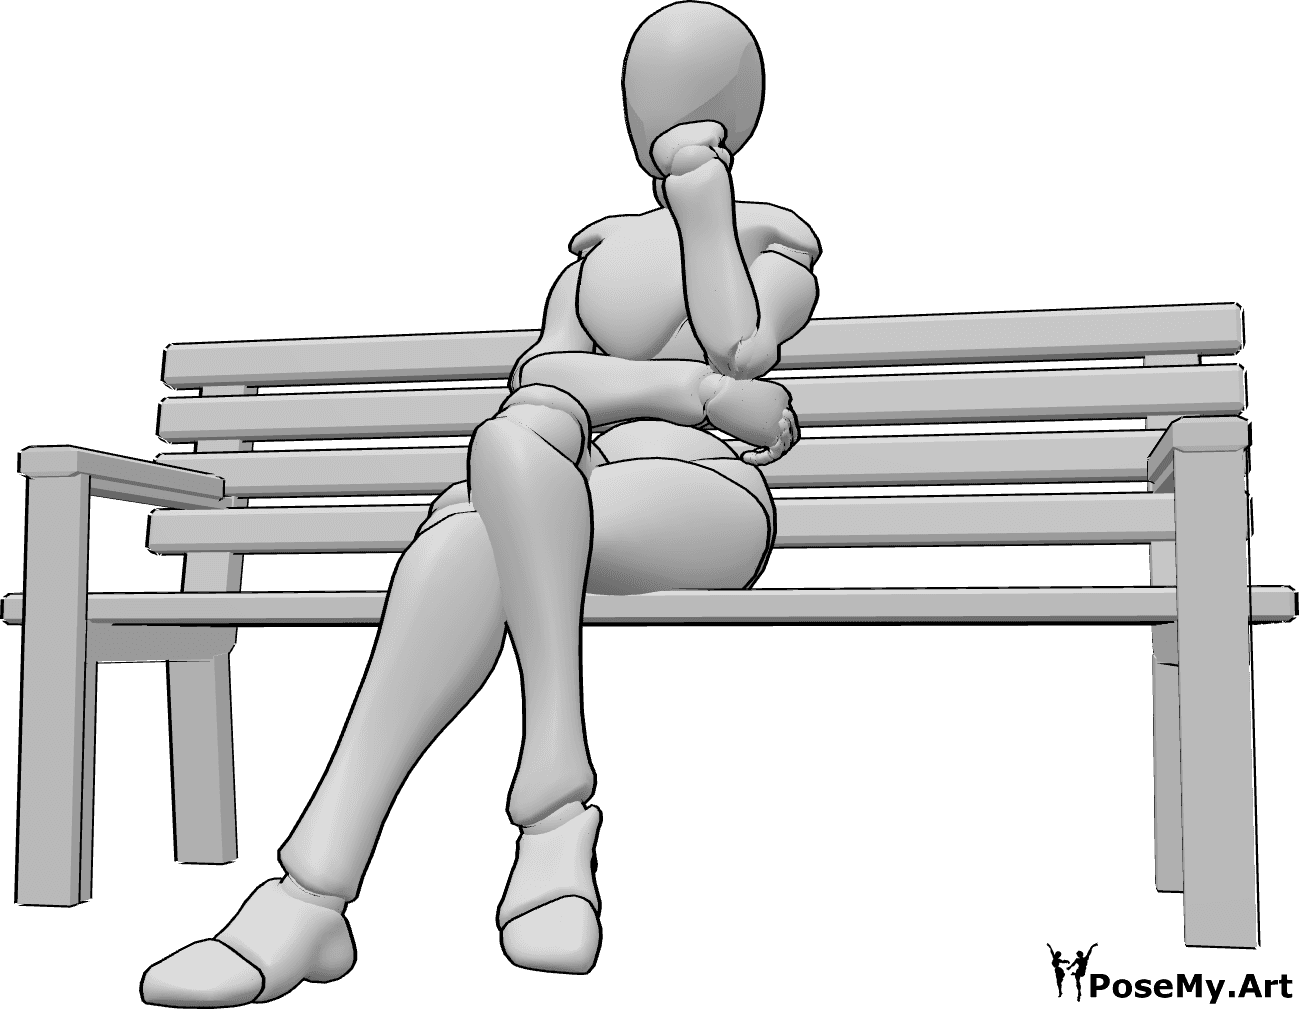 Pose Reference- Sitting bench pose - Female is sitting on the bench with her legs crossed